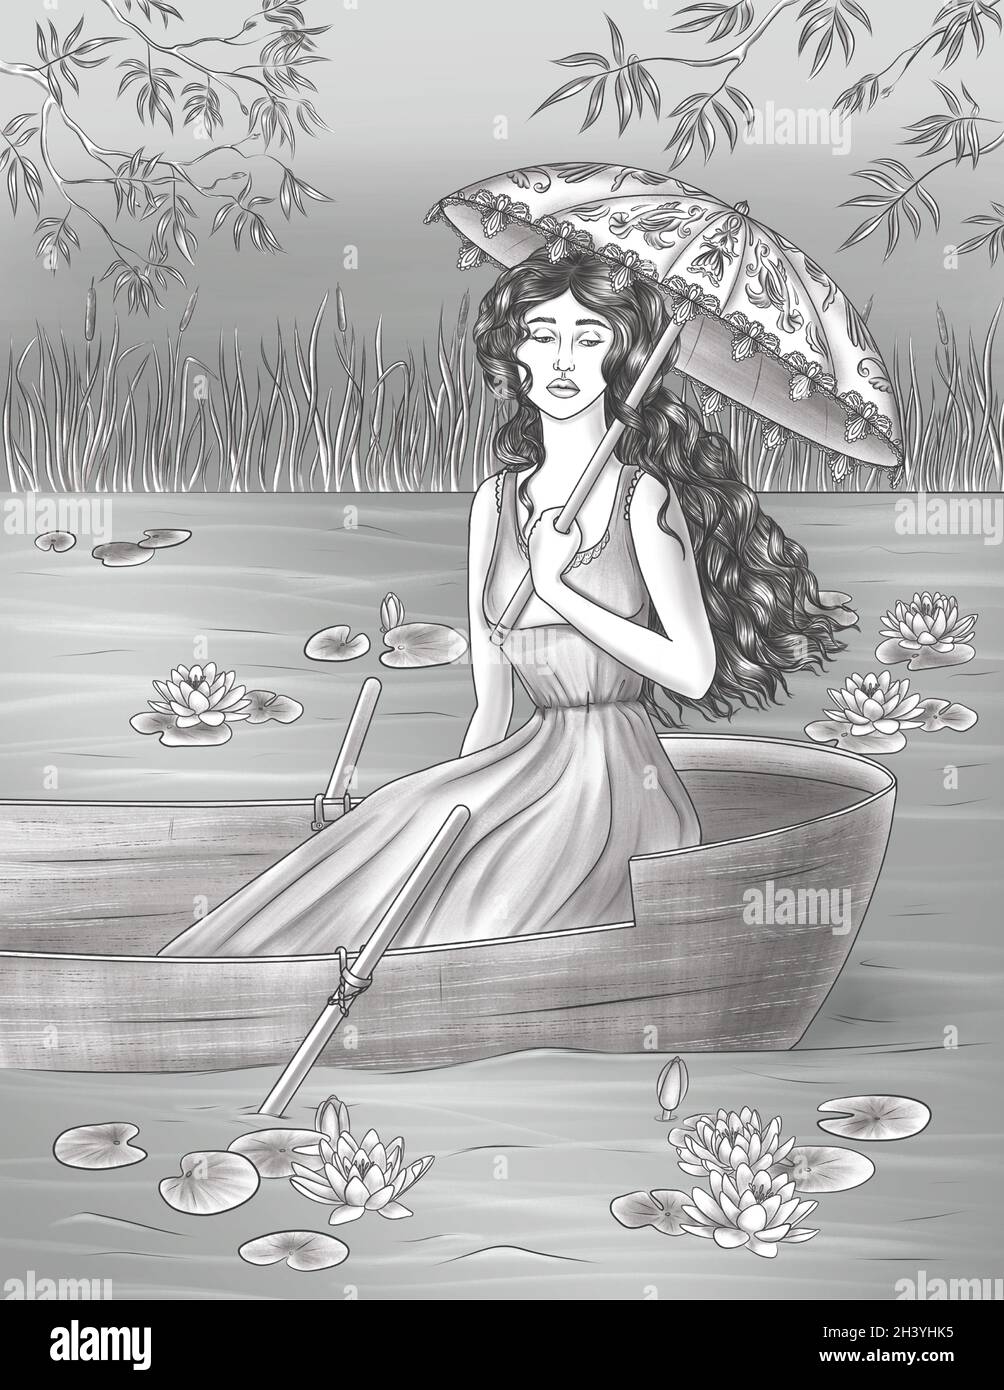 Sad Lady In Dress Carrying Umbrella On A Boat Floating In Lake With Water Lilies Colorless Line Drawing. Lonely Long Haired Woma Stock Photo